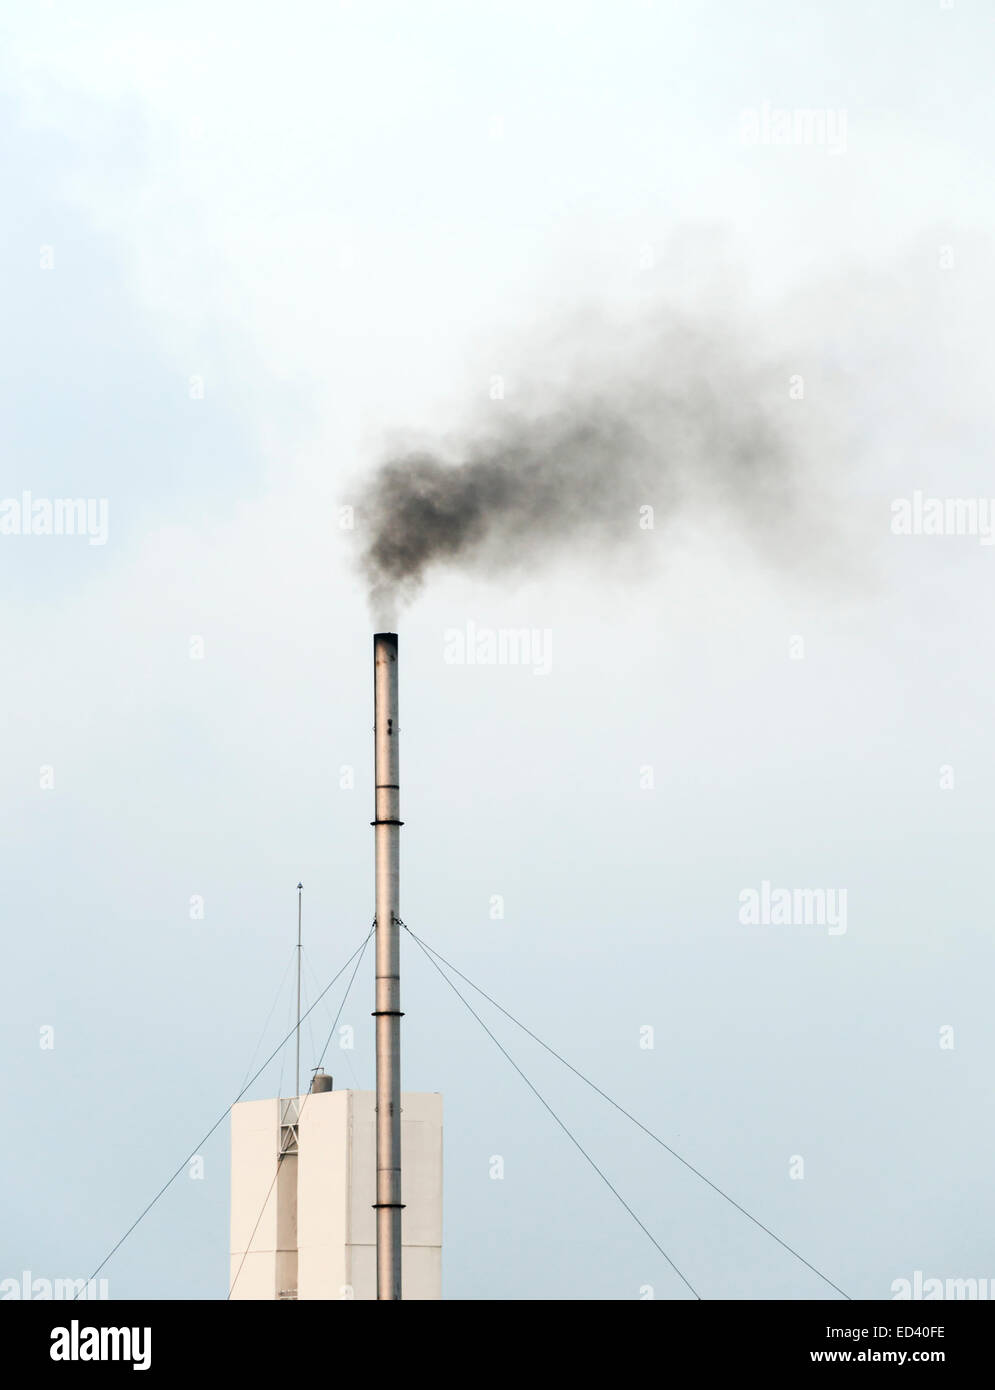 Emissions from the old smokestacks of industrial plants. Stock Photo